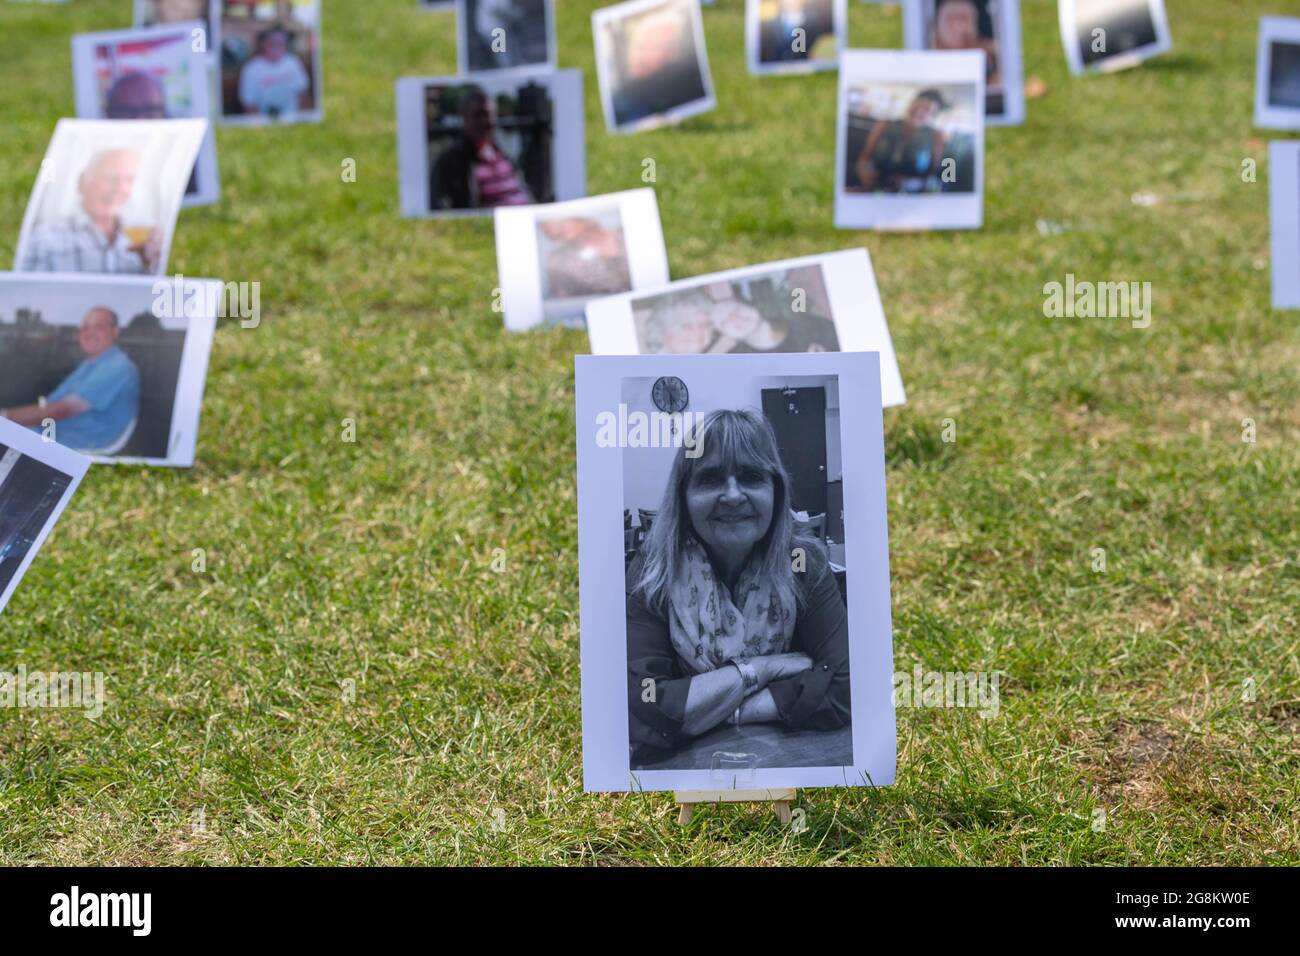 London, UK. 21st July, 2021. Covid-19 Bereaved families for Justice protest, Old Palace Yard Opposite the Houses of Parliament. 650 pictures (one for each MP) of those who have died from Covid-19 Credit: Ian Davidson/Alamy Live News Stock Photo